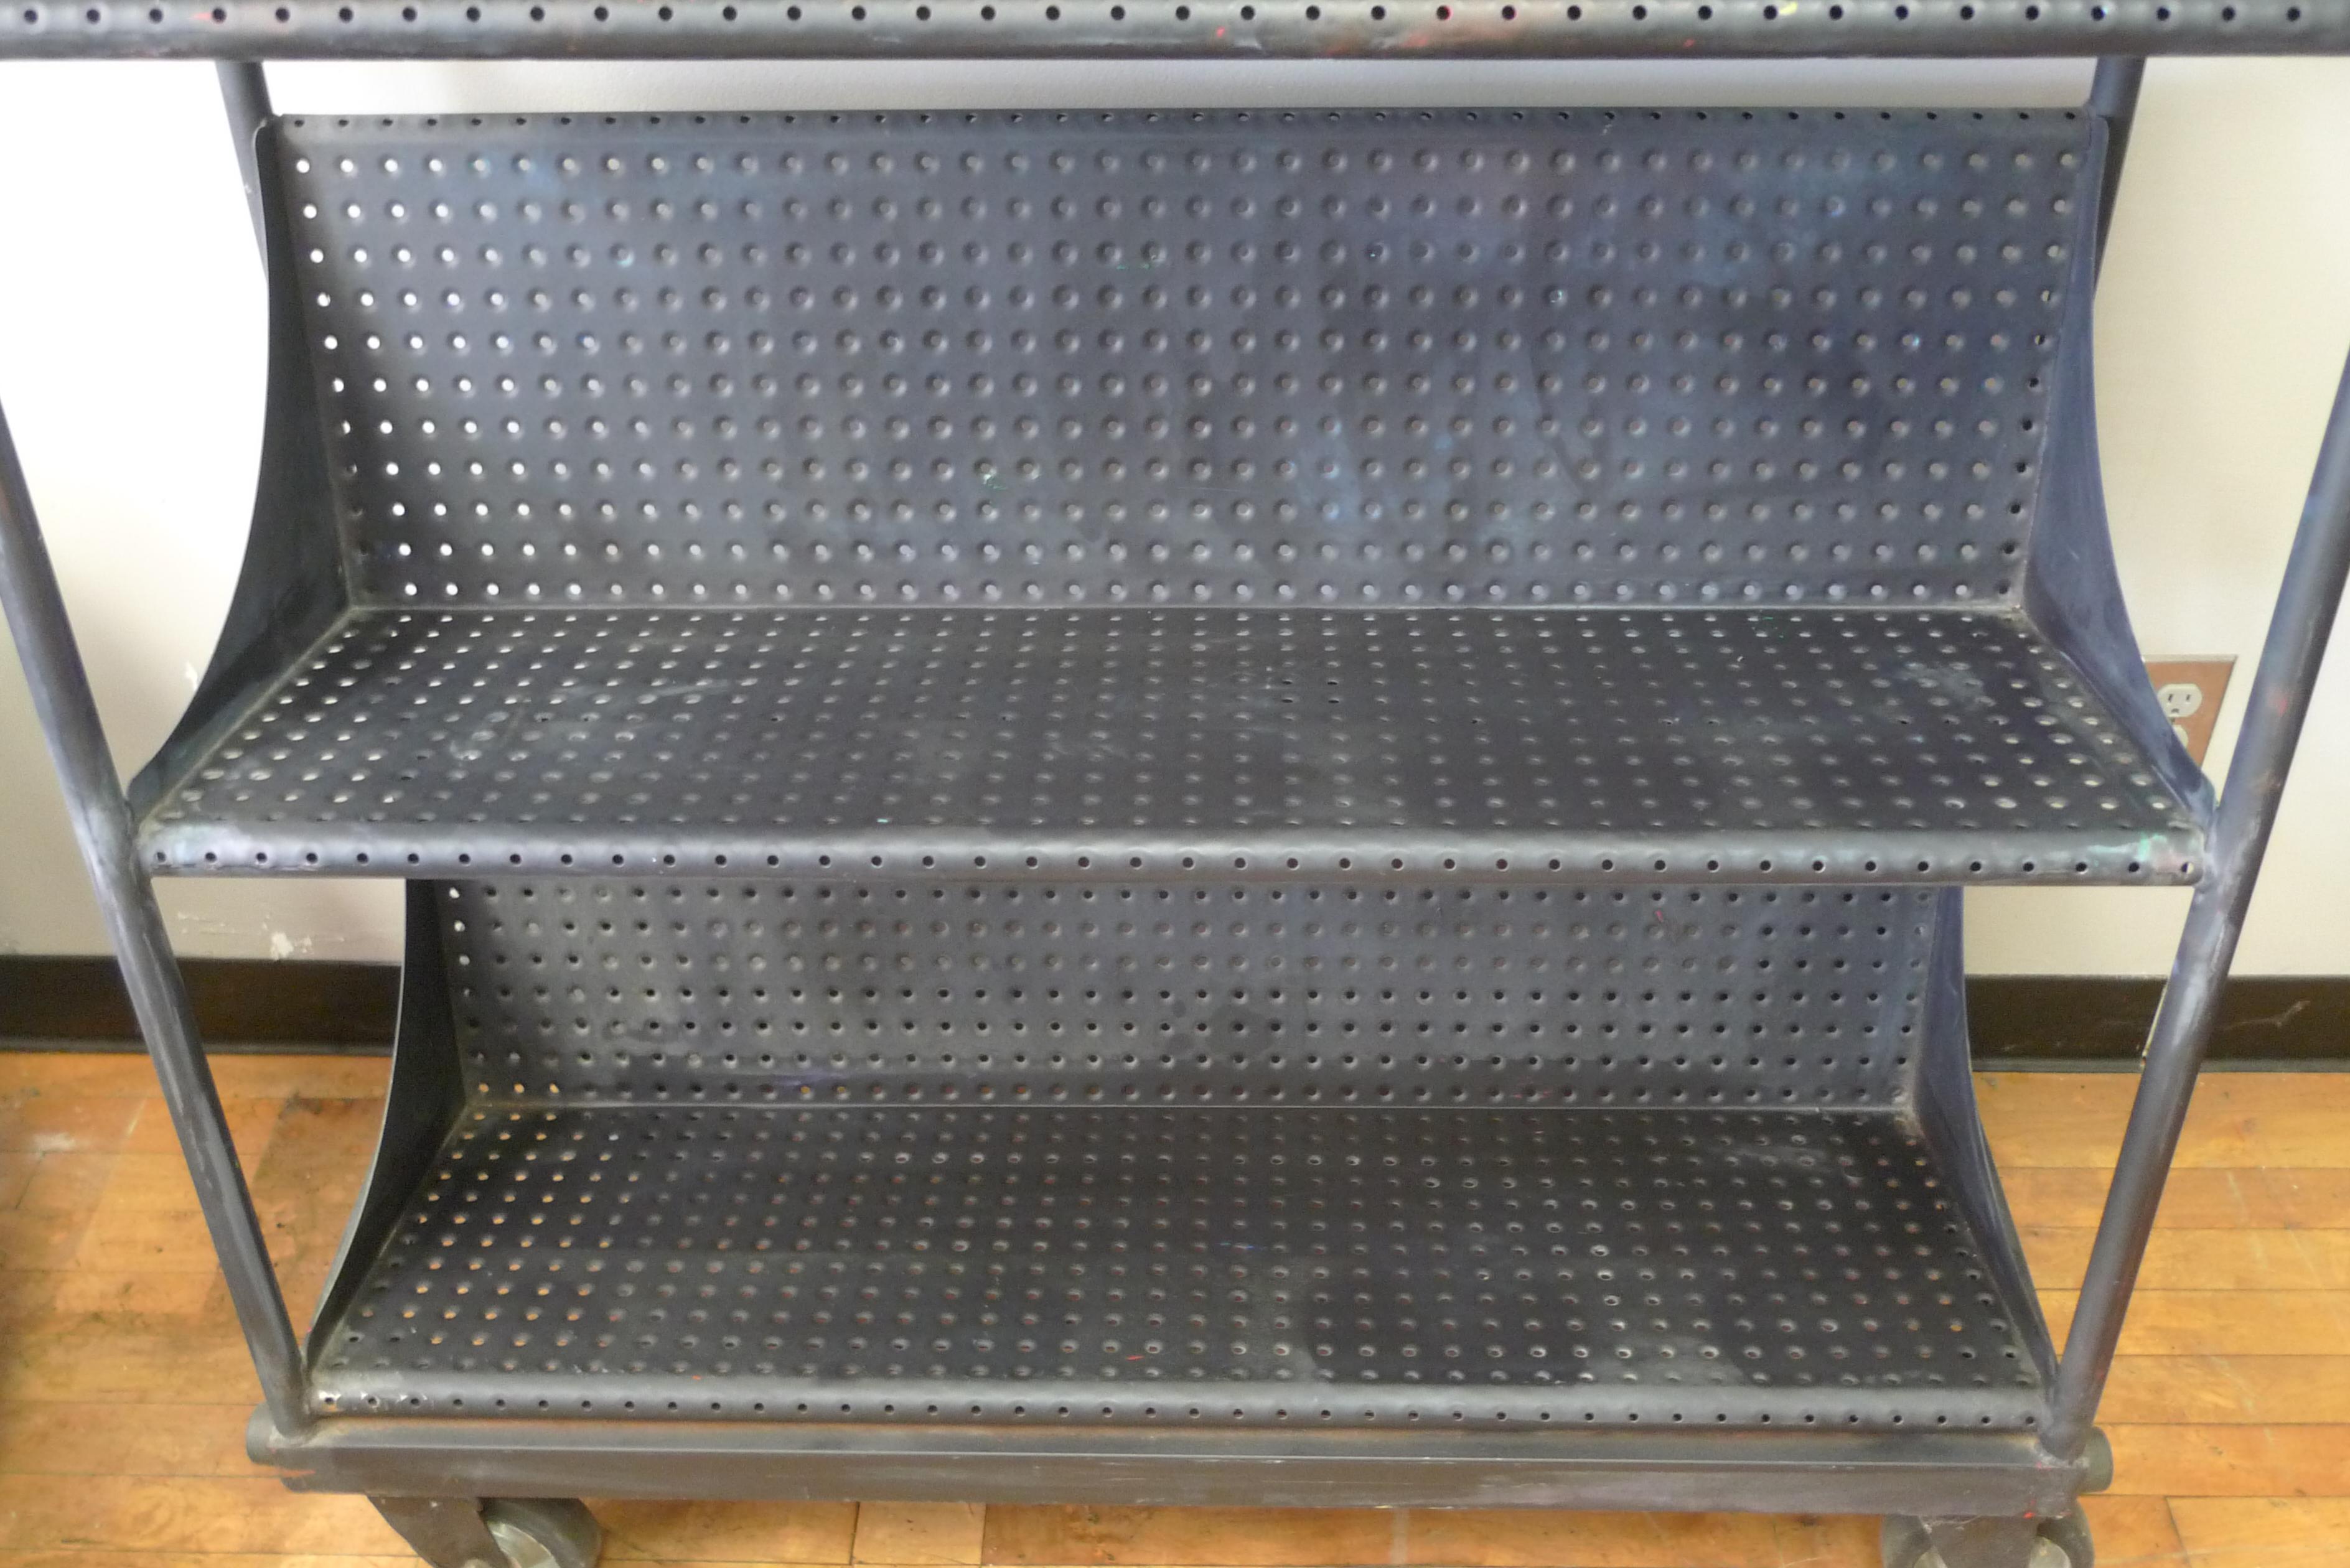 American Industrial Shelving Unit on Wheels with Perforated, Black-Painted Steel Shelves